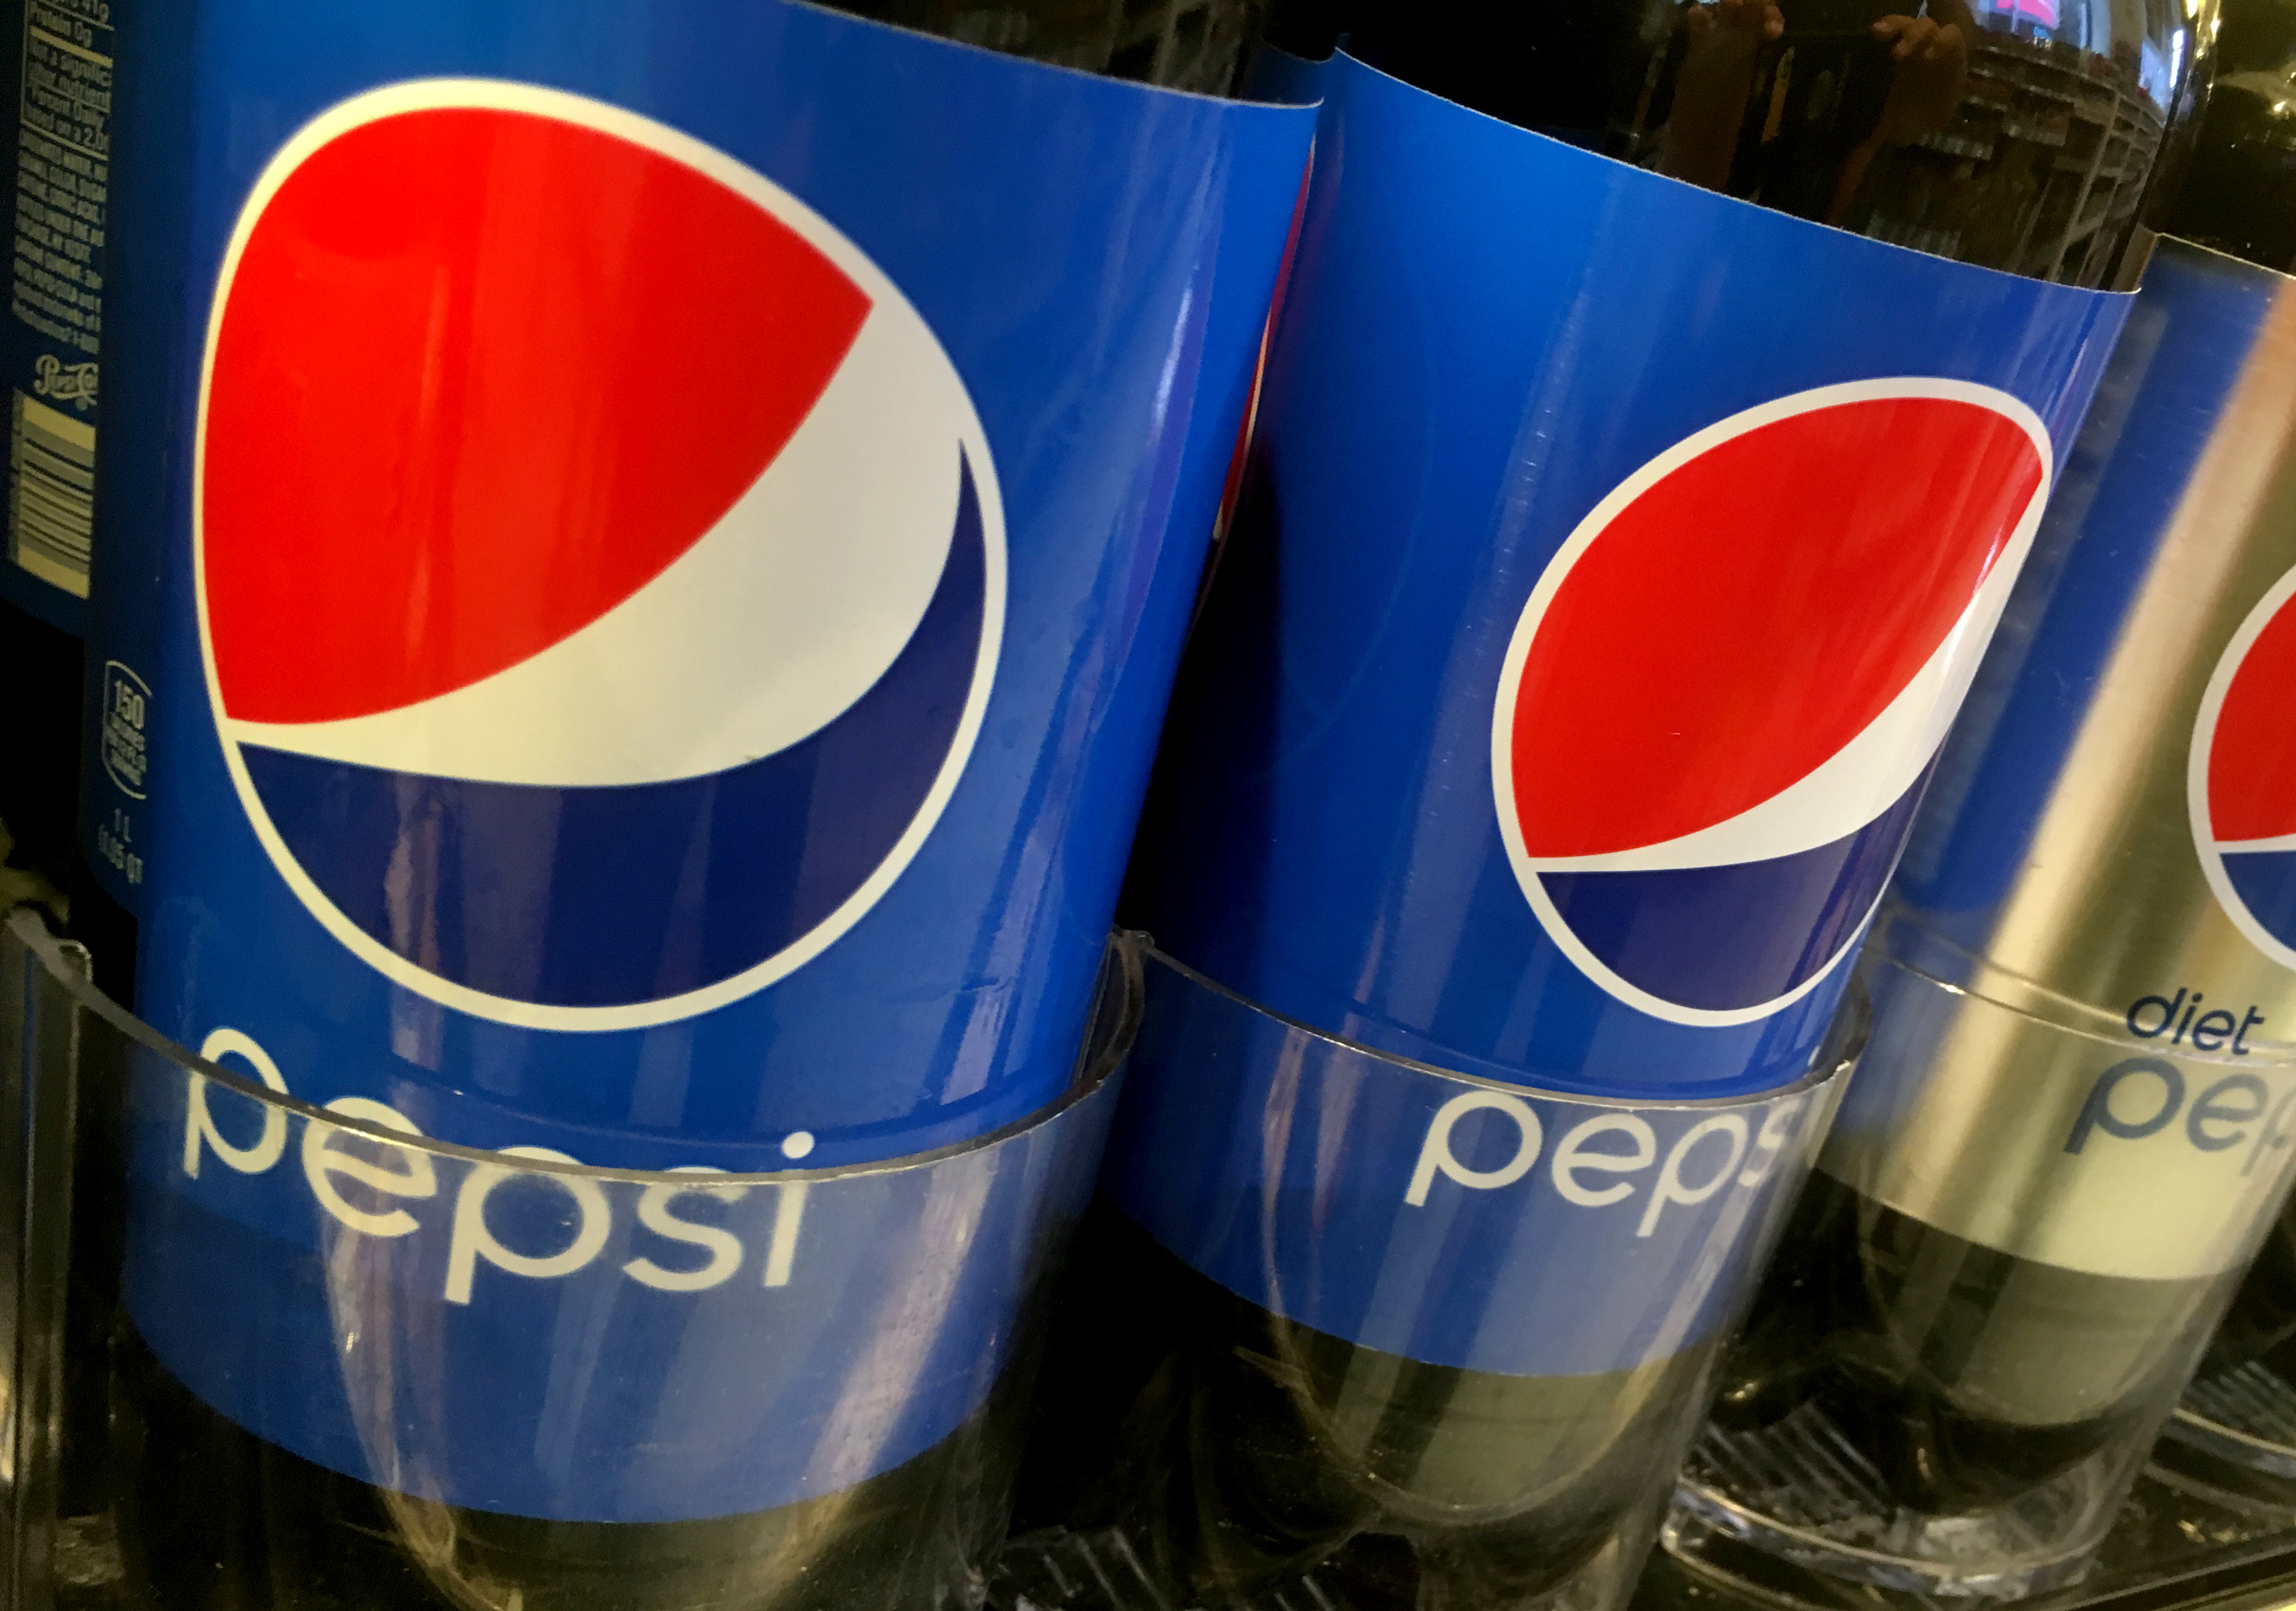 New York sues PepsiCo over plastics it says pollute, hurt health | Reuters | Billiger Donnerstag